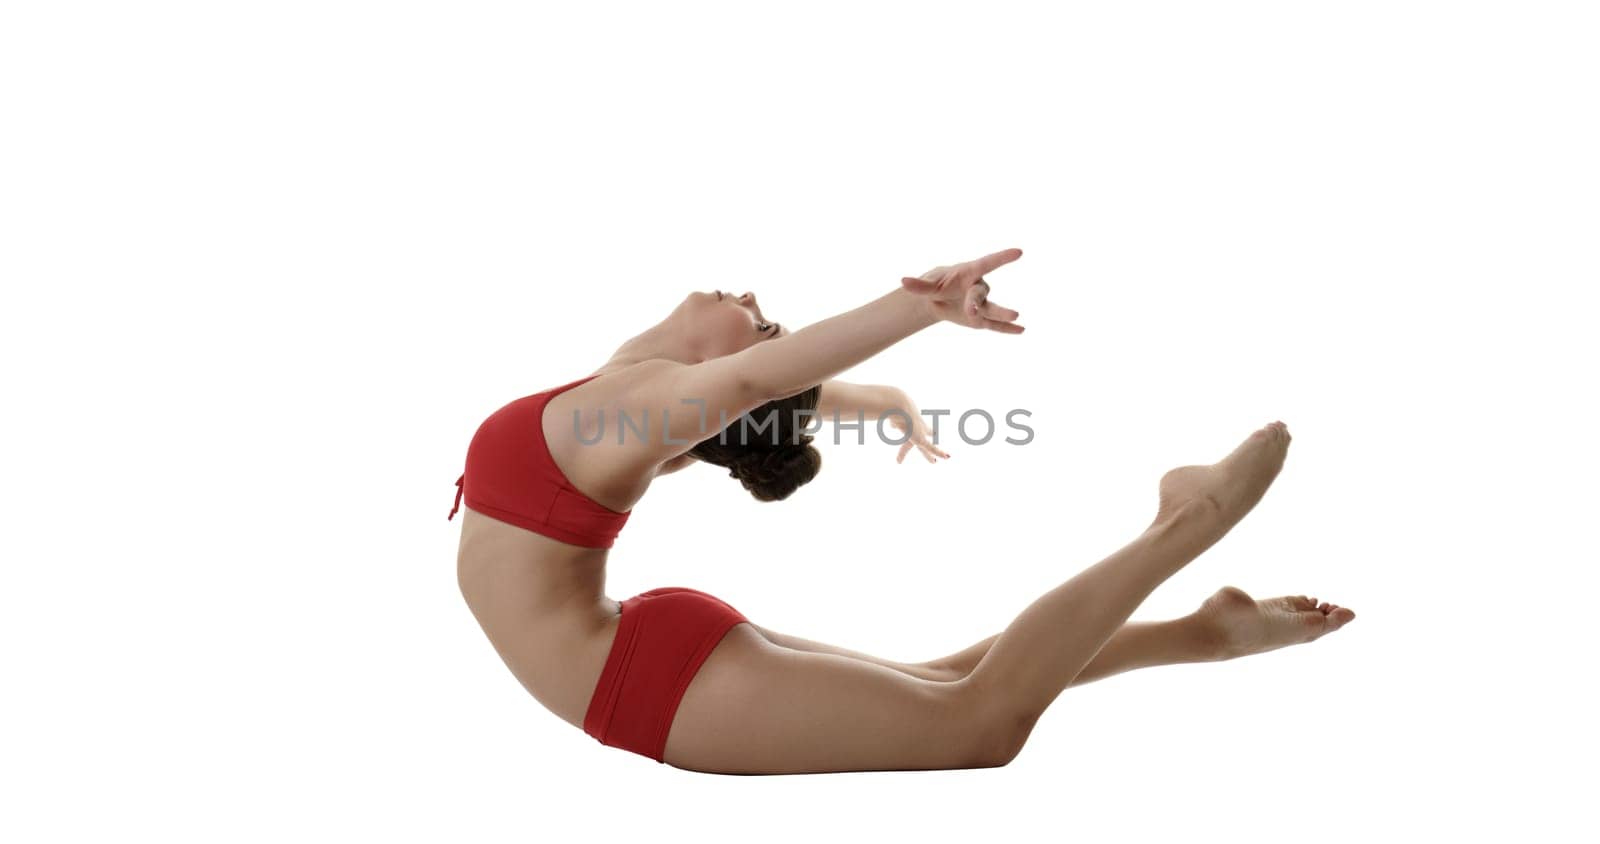 Lovely female gymnast arched her back at camera. Isolated on white